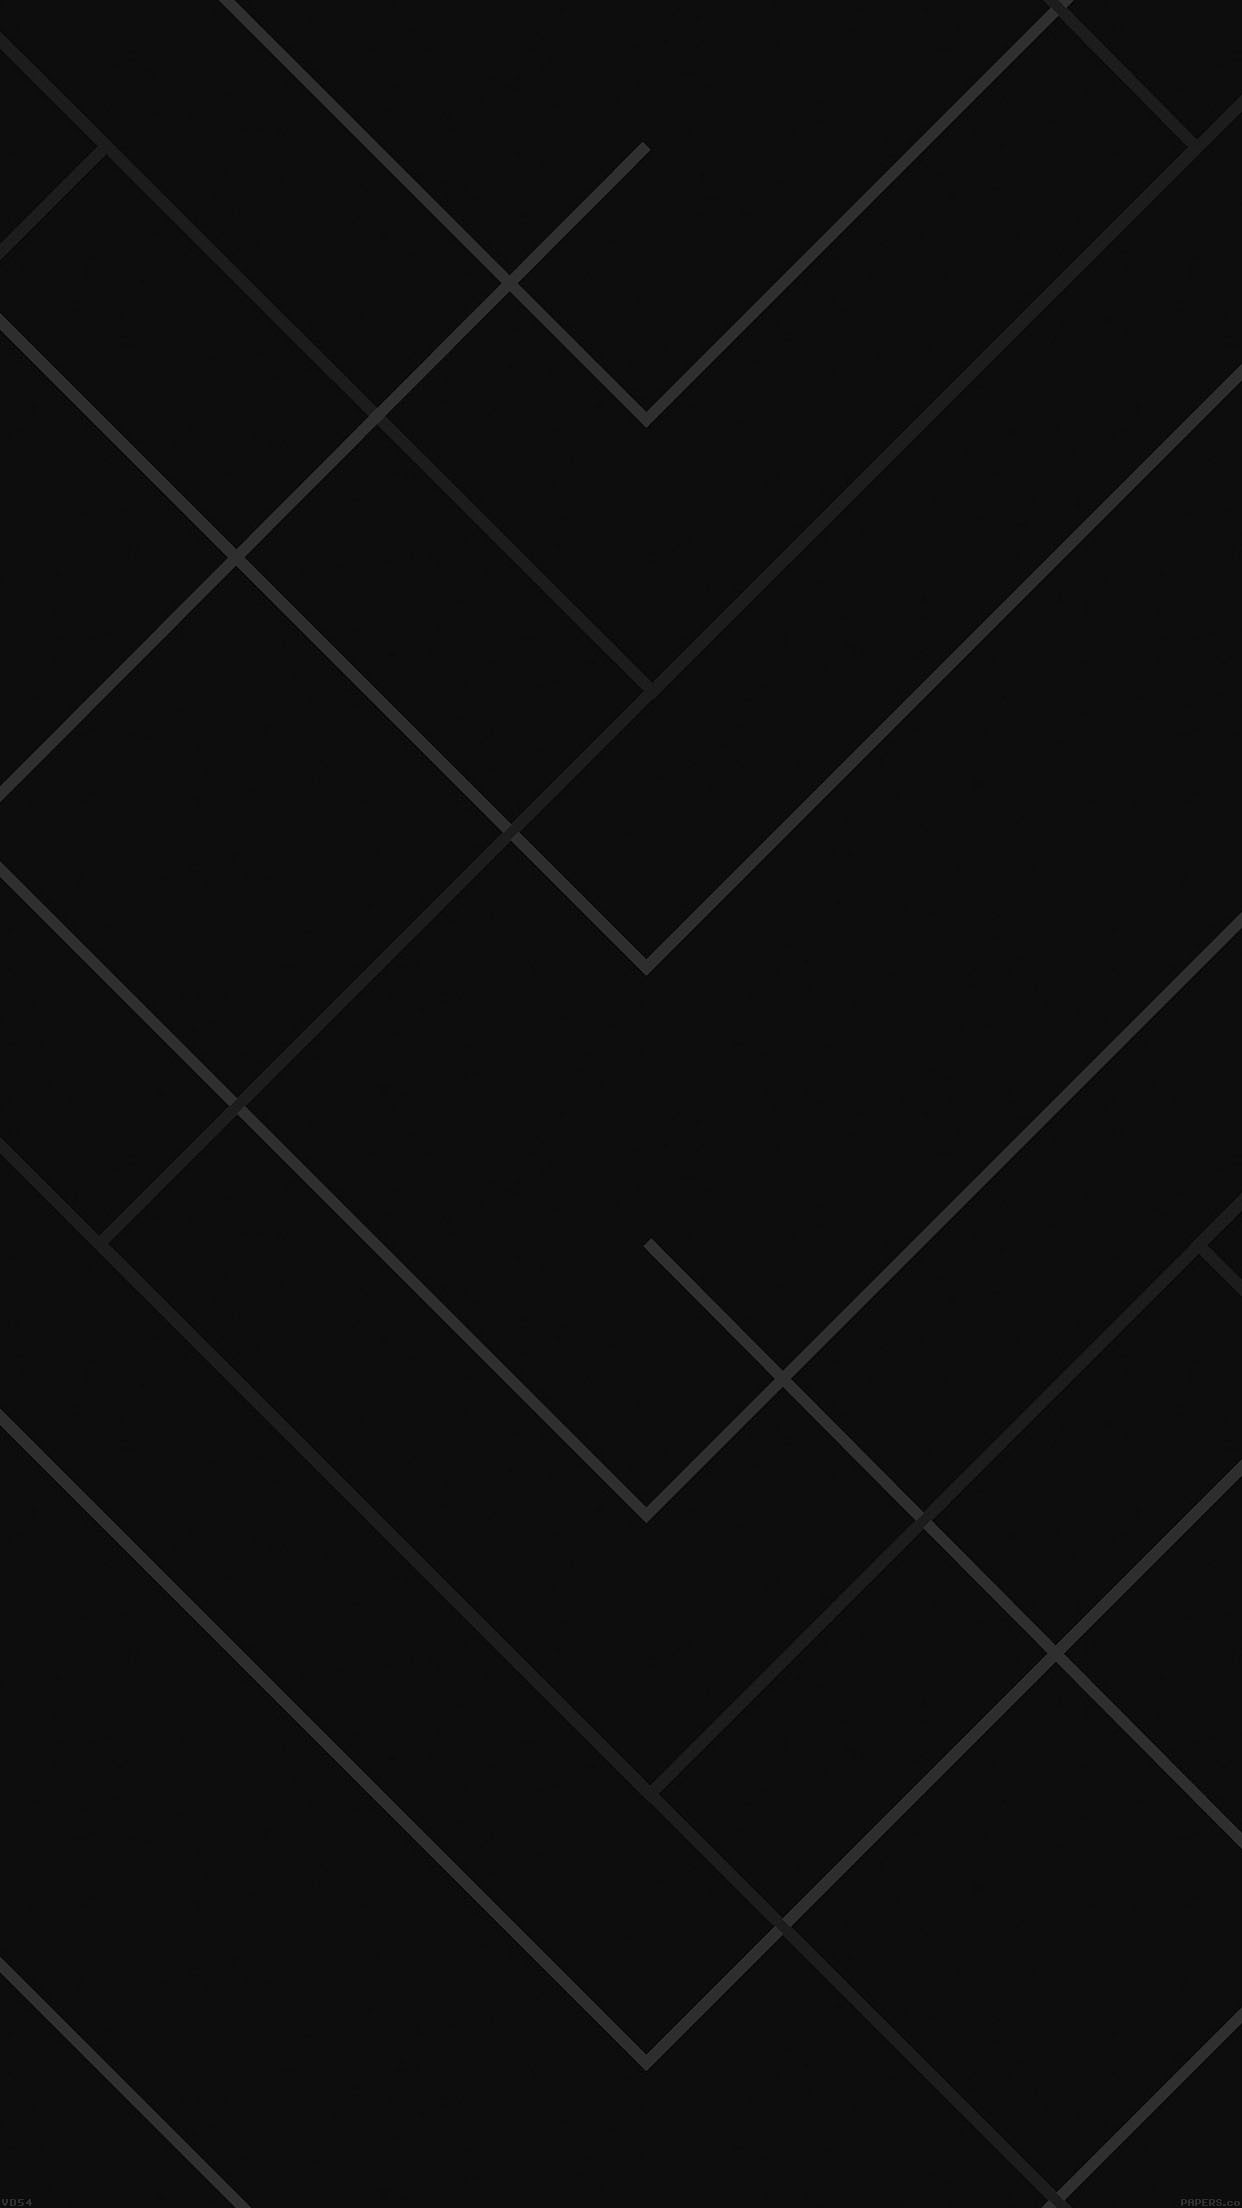 Wallpaper Hd For Android Black